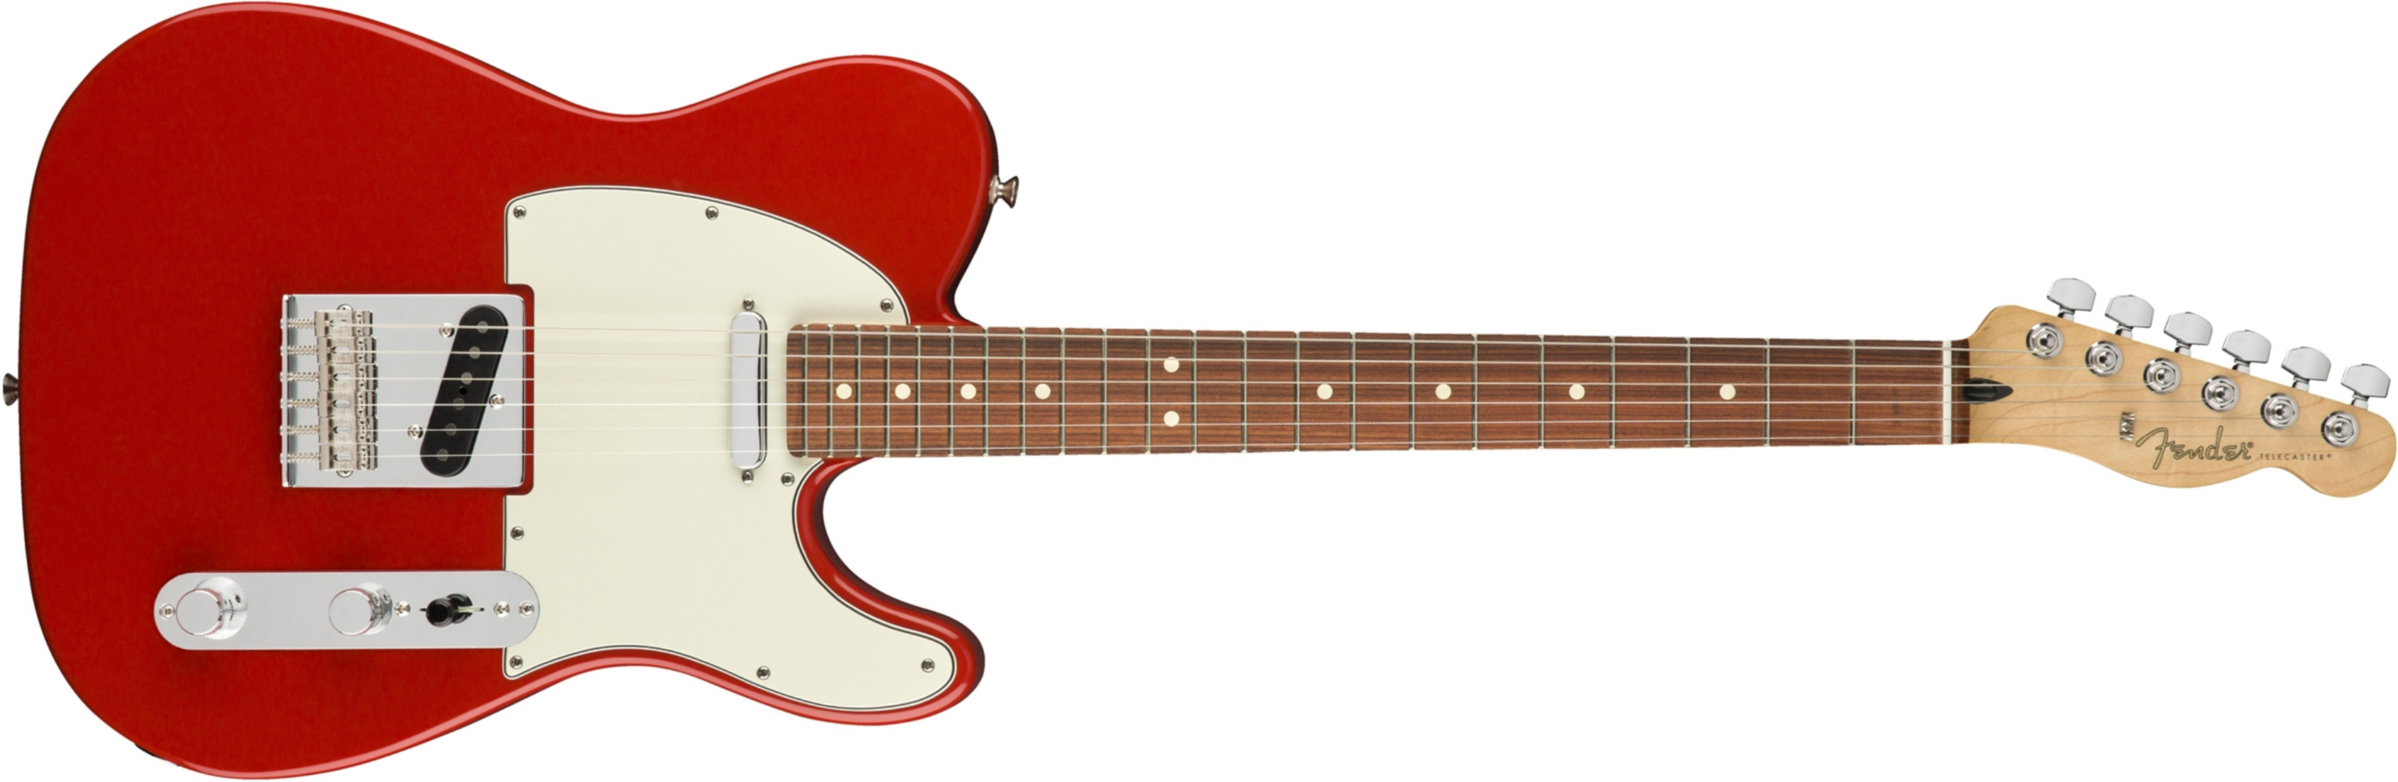 Fender Tele Player Mex Ss Pf - Sonic Red - Tel shape electric guitar - Main picture